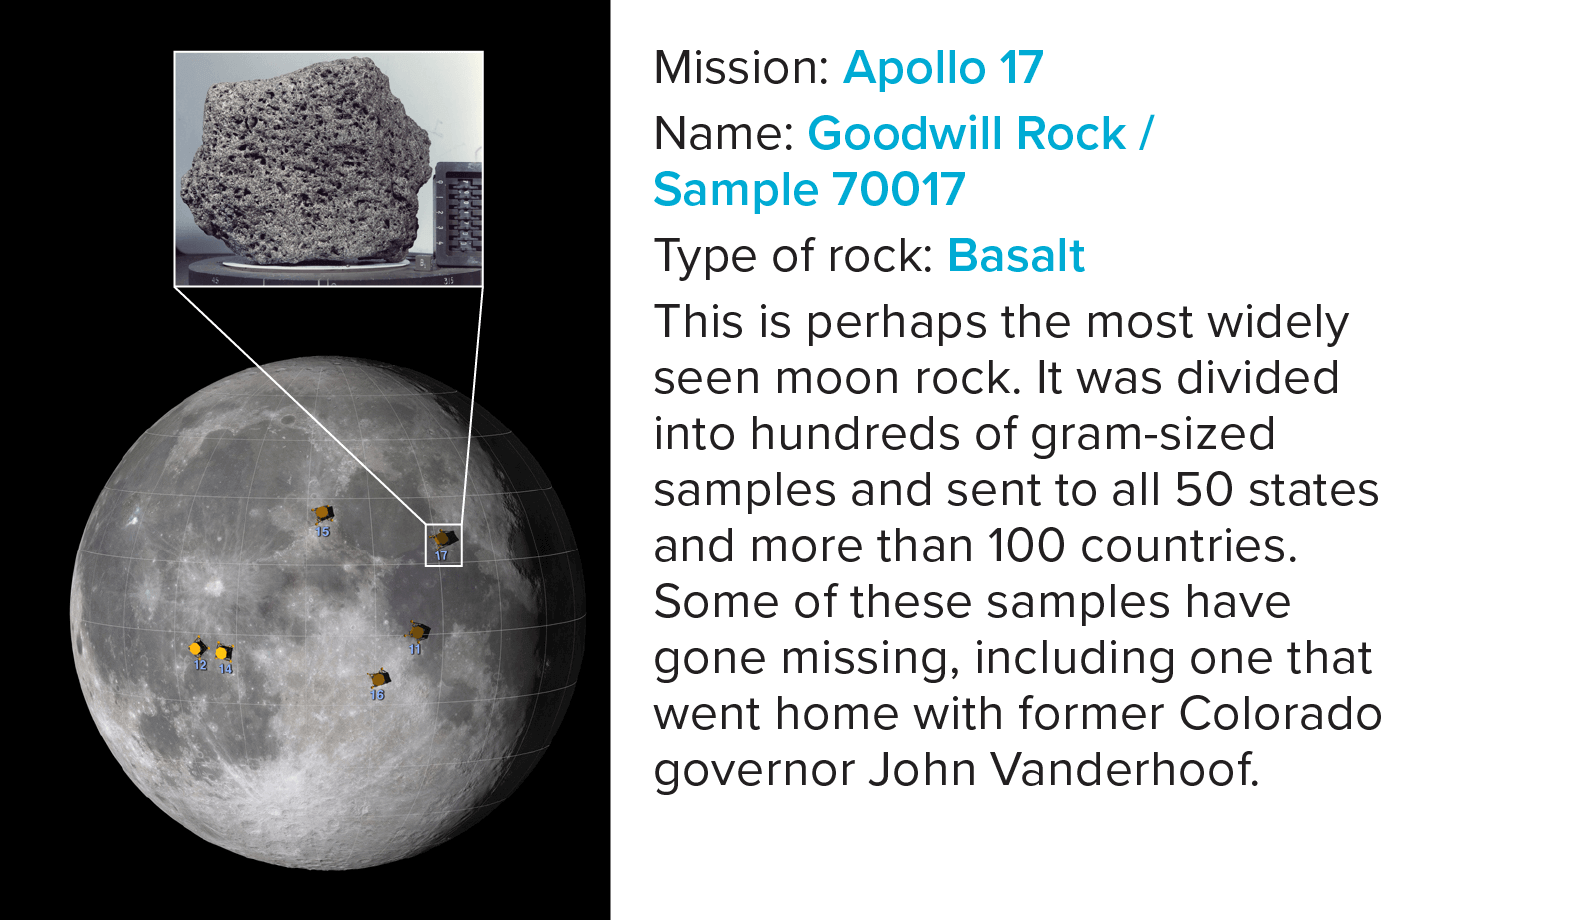 This is perhaps the most widely seen moon rock. It was divided into hundreds of gram-sized samples and sent to all 50 states and more than 100 countries. Some of these samples have since been stolen or gone missing, including one that went home with former Colorado governor John Vanderhoof.